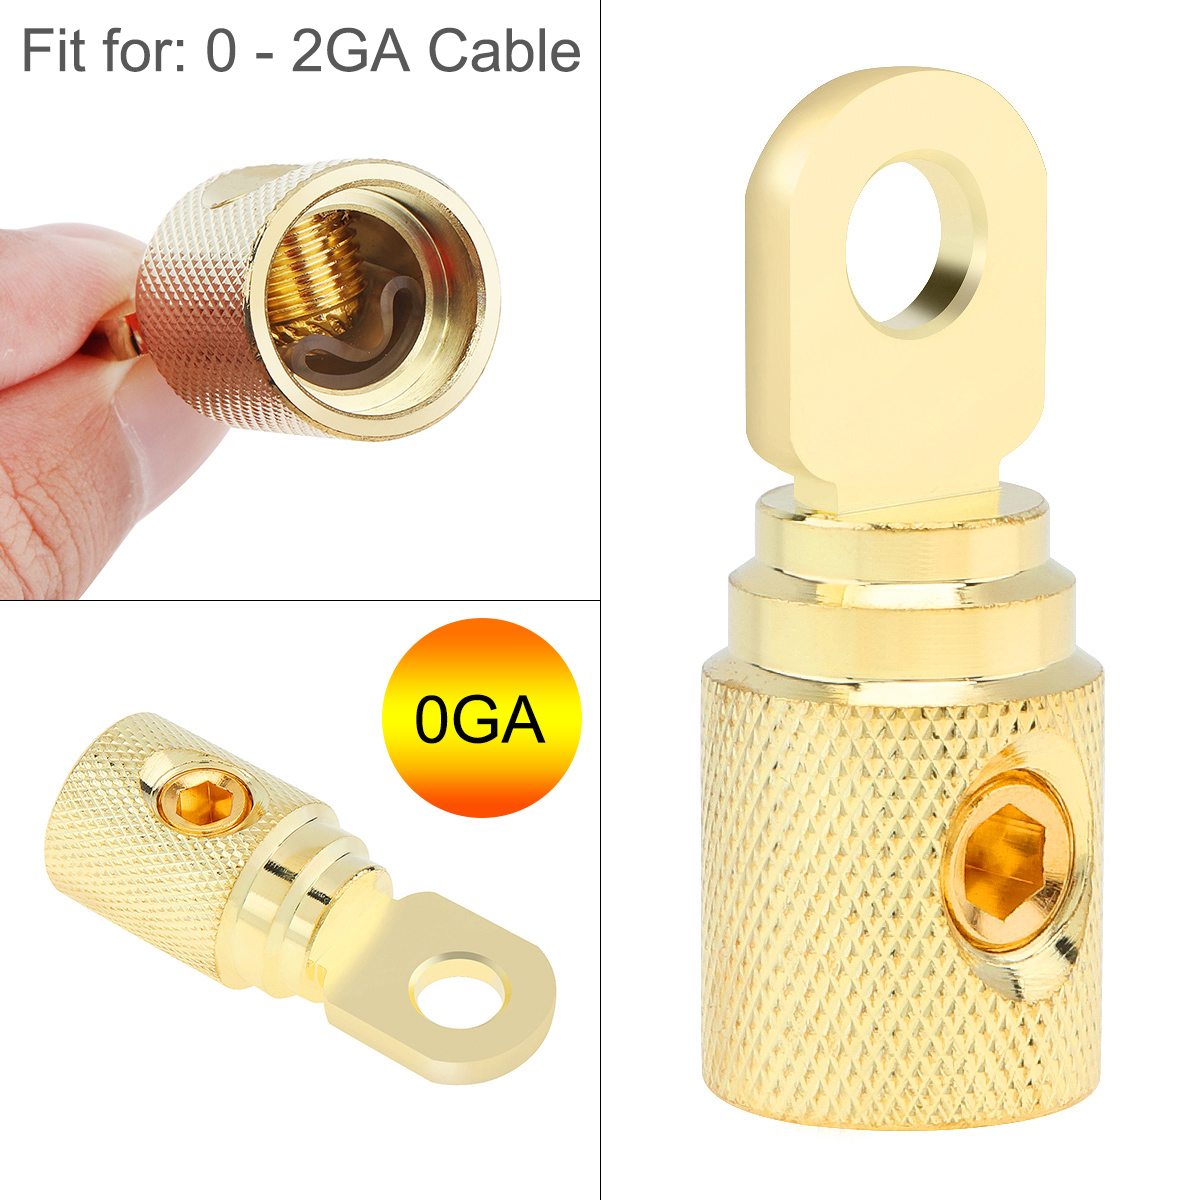 2Pcs 0 Gauge Brass with Gold Plated Ring Set Screw Battery Ring Terminals Amp Input Reducers for 0-2 Gauge Wire 